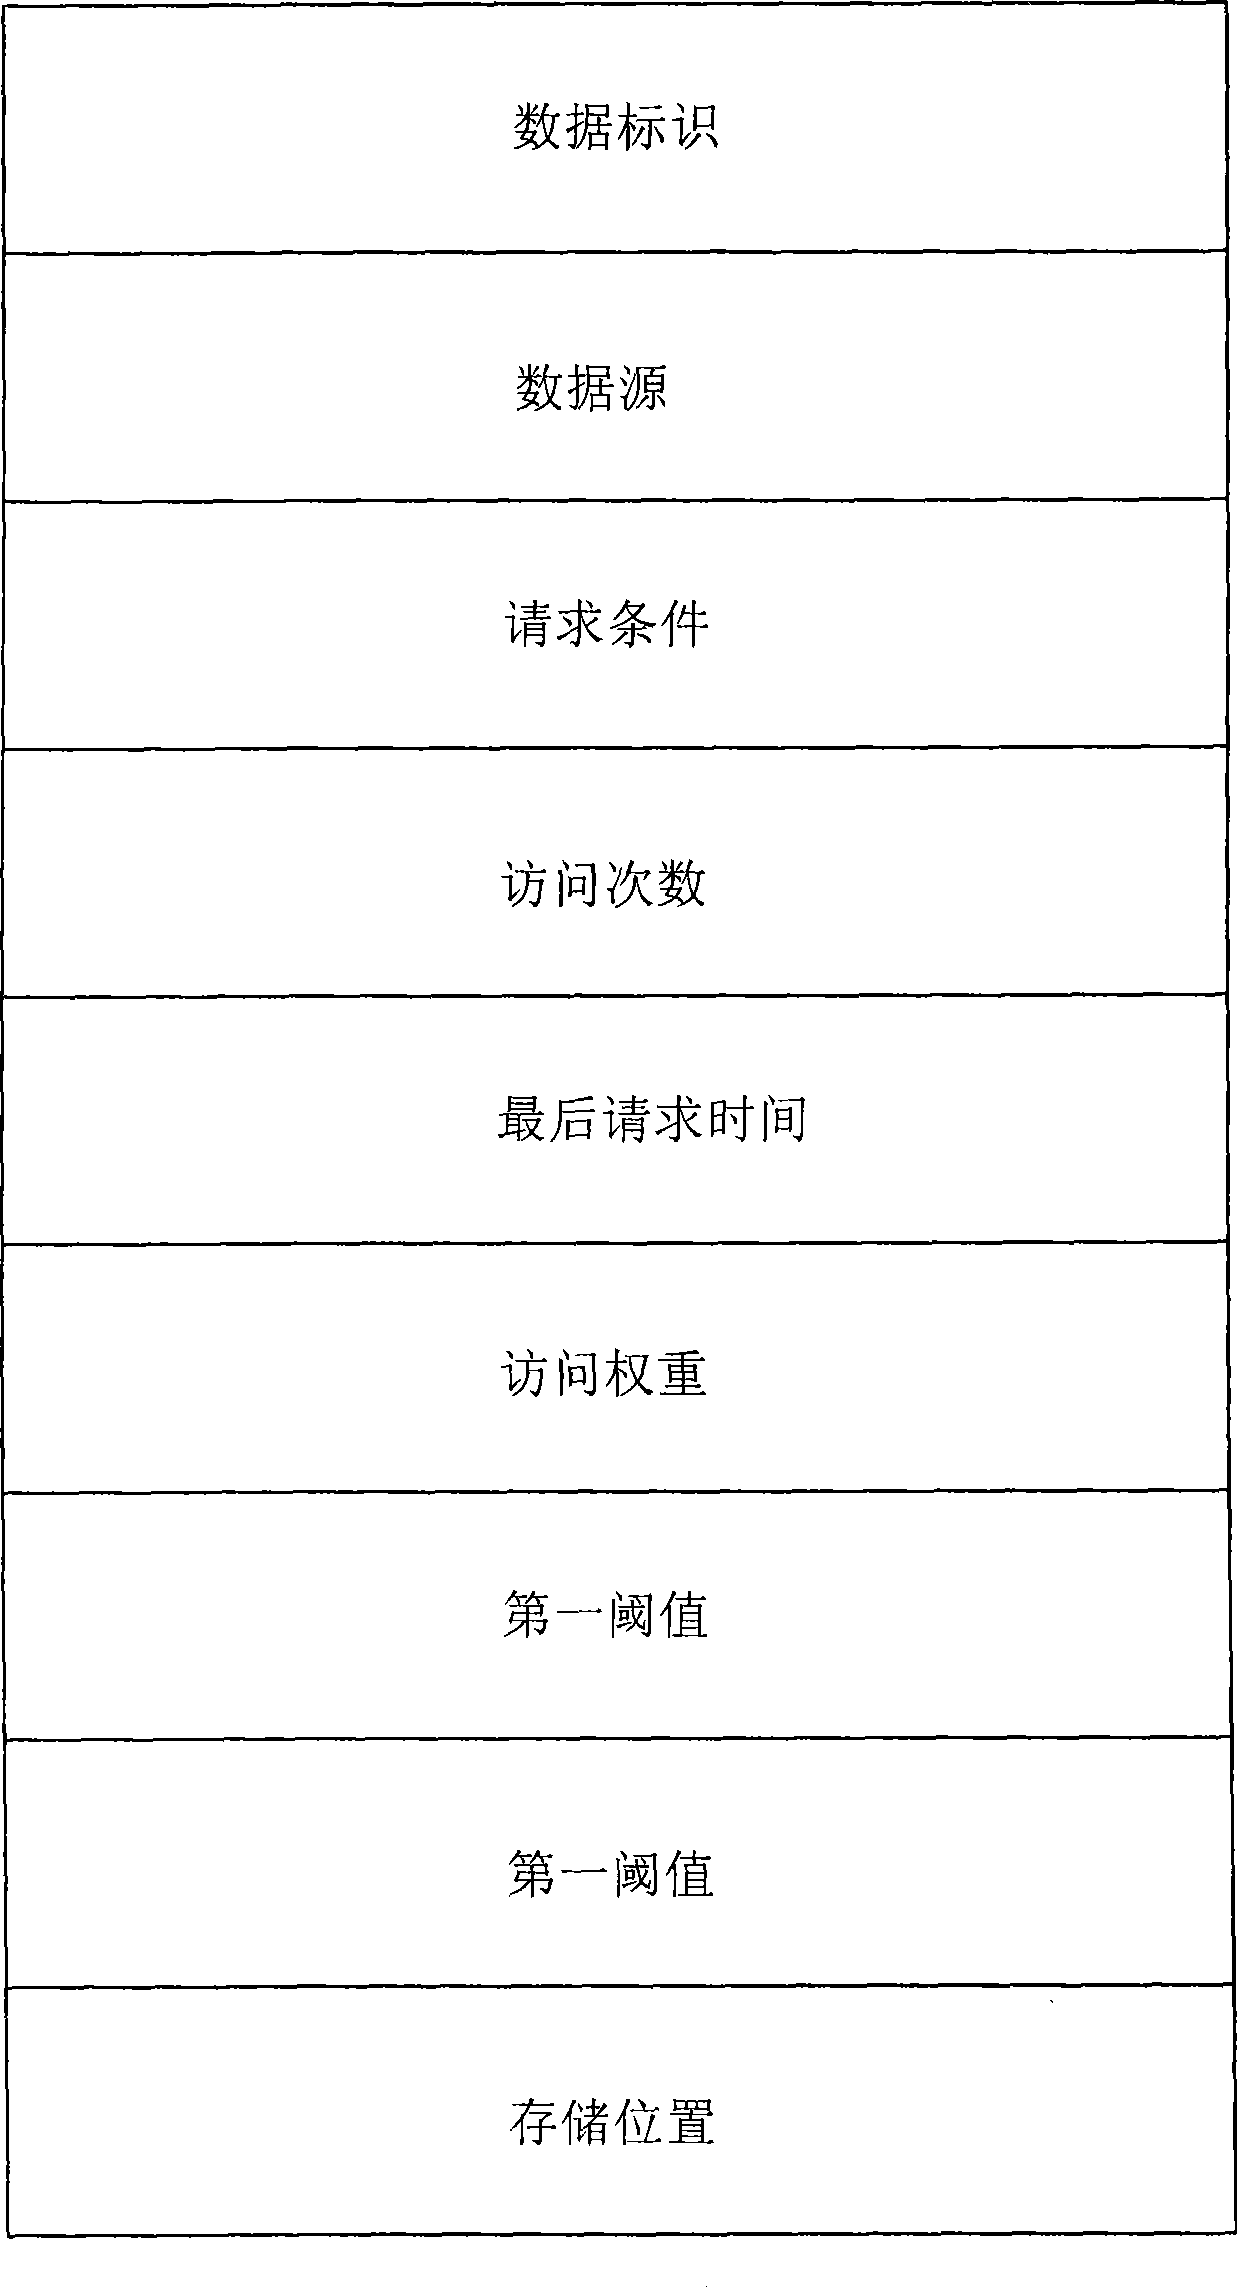 Continuous storage data storing and managing method and system based on access frequency